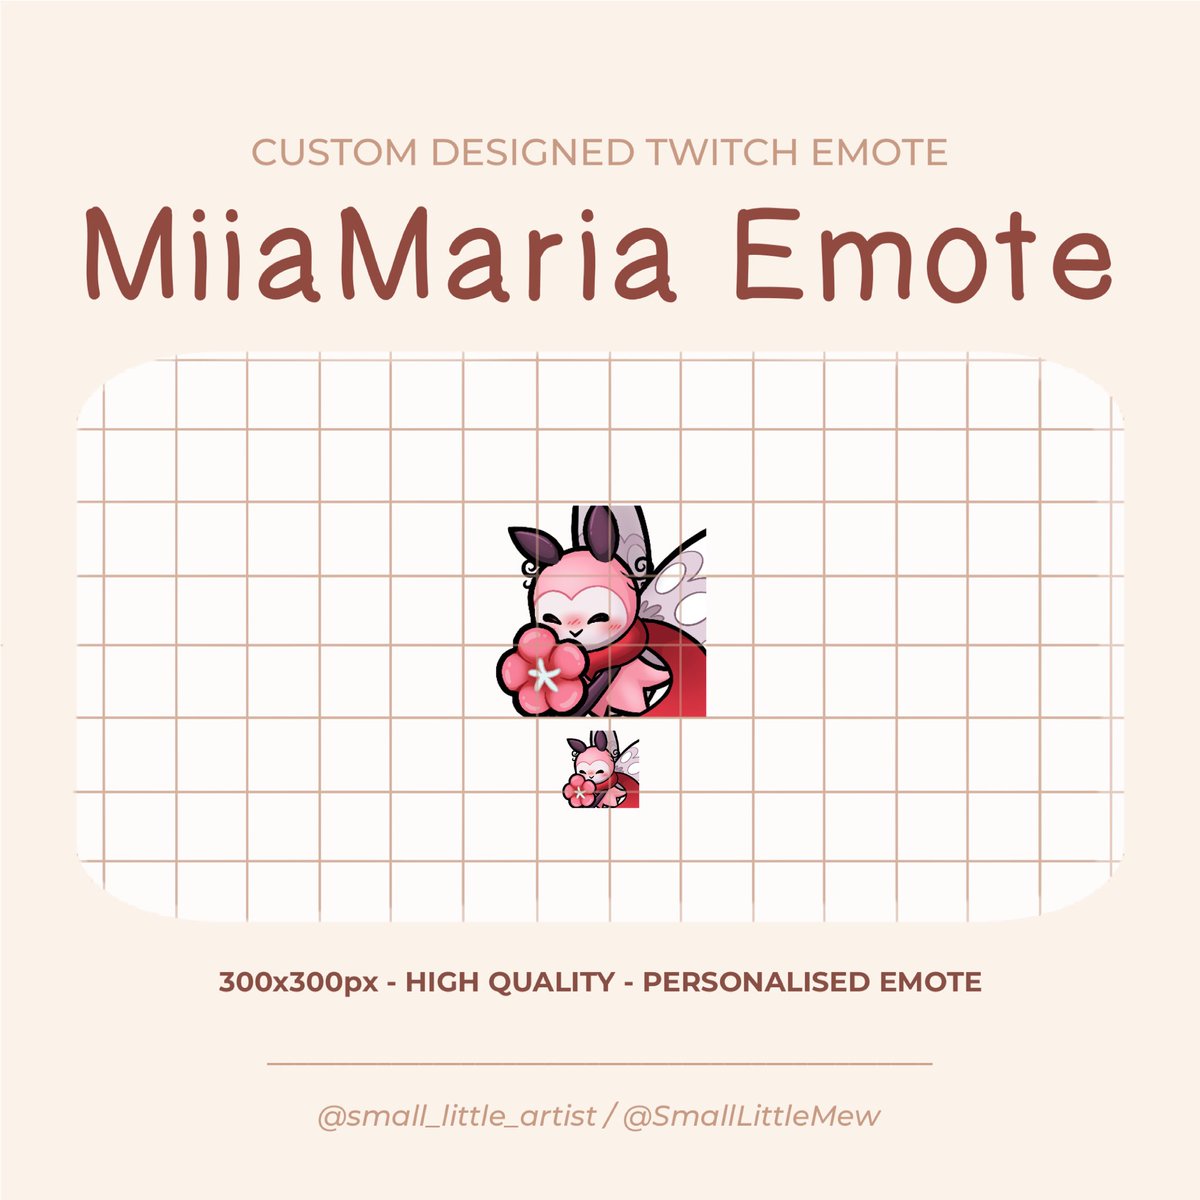 Another emote commission complete! Thank you so much to @miiamariak for commissioning me! I had so much fun working on this cutiepie! 🥰💕

#emotecommission #emote #commission #twitchemote #emoteartist #customemote #chibiemote #chibi #anime